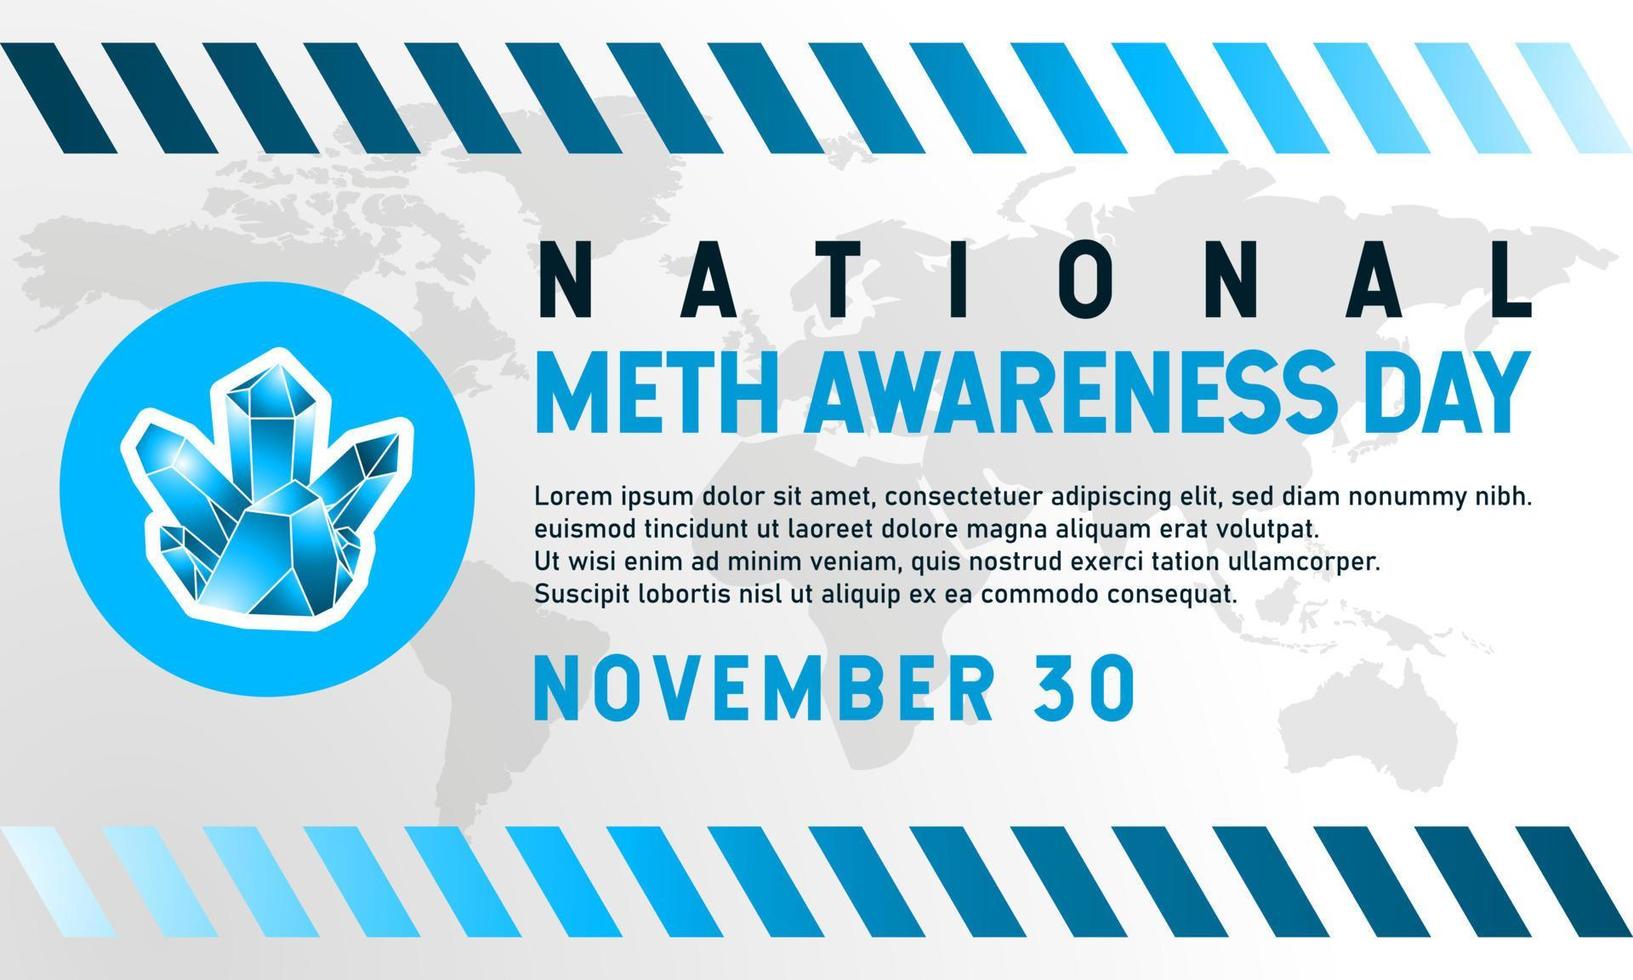 National Meth Awareness Day Background. November 30. Template for banner, greeting card, or poster. With a blue crystal amphetamine icon. Premium vector illustration